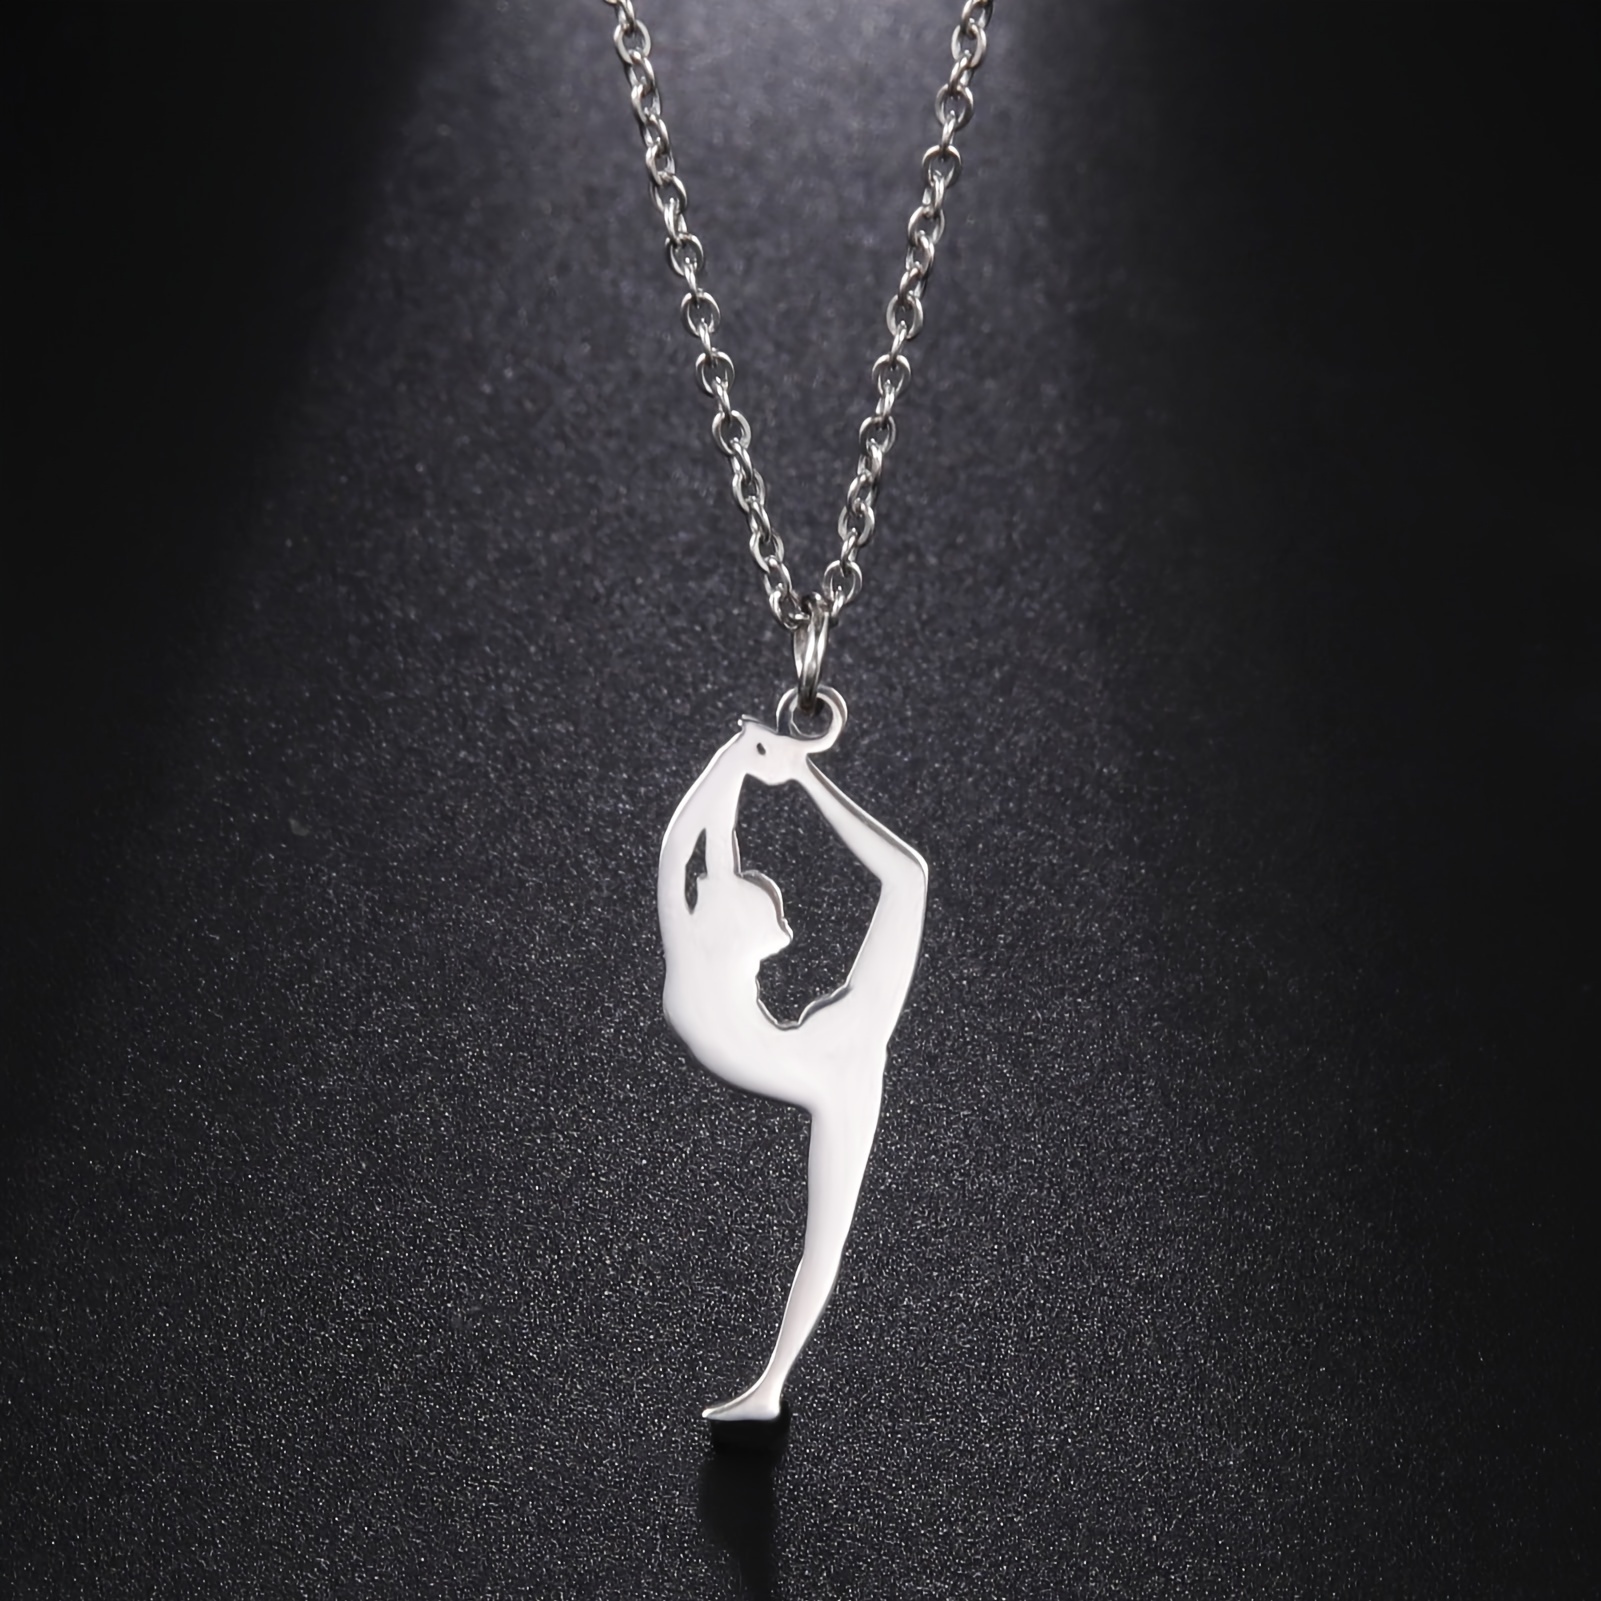 

Gymnast Gymnastics Pendent Necklace, Men's Polished Stainless Steel Necklace, Ballet Dancer Jewelry Gift